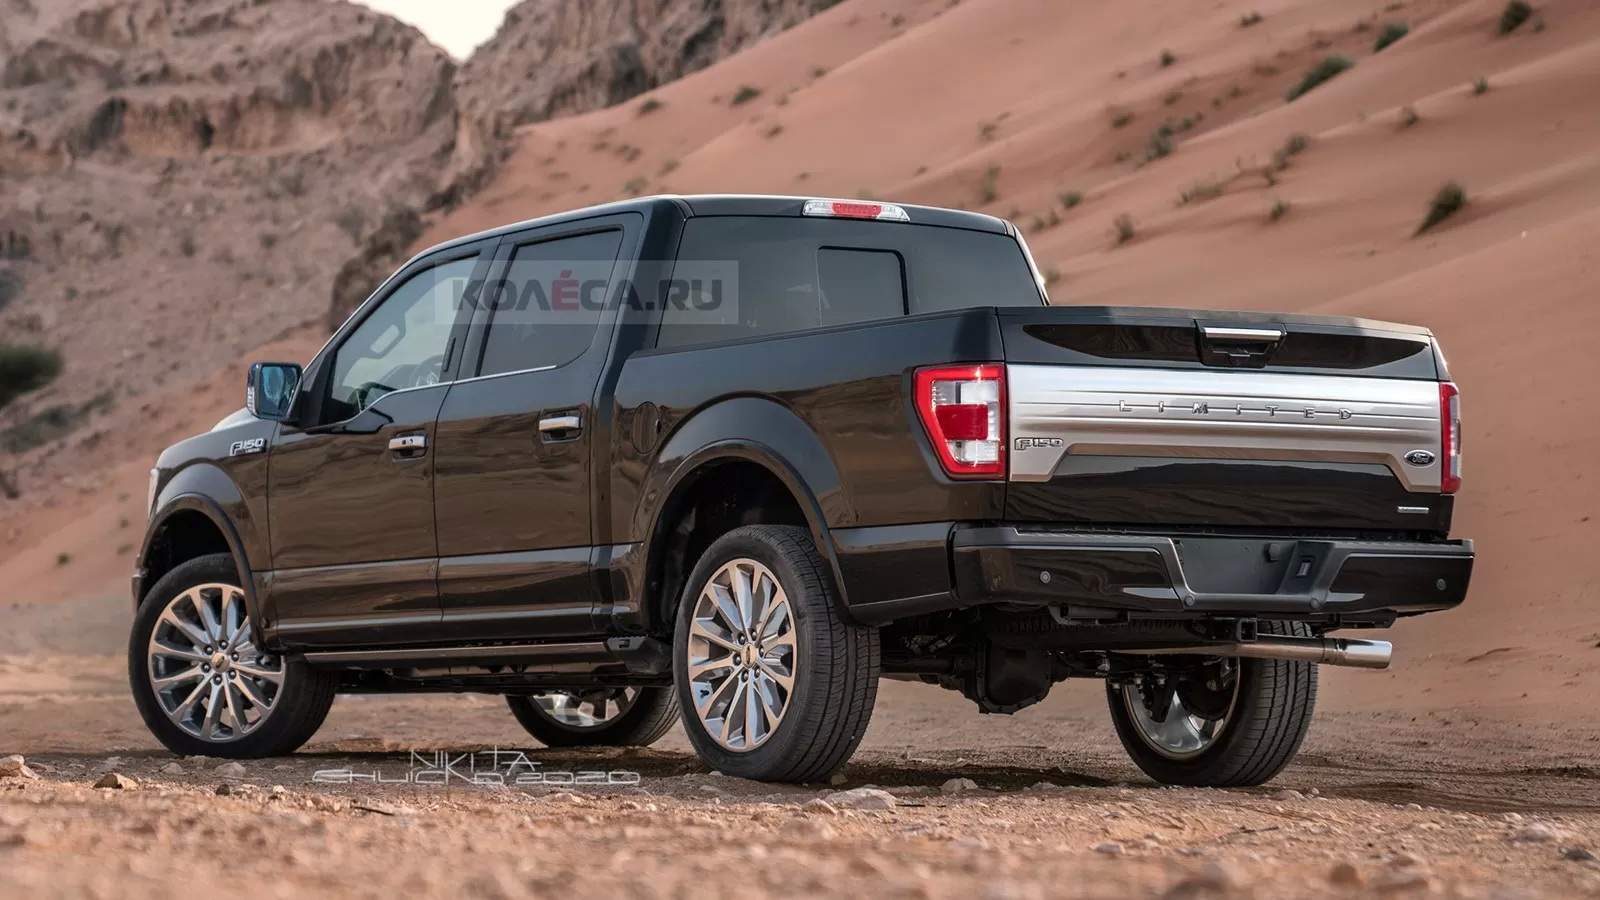 Free download New 2021 Ford F 150 To Reach First Customers This Fall